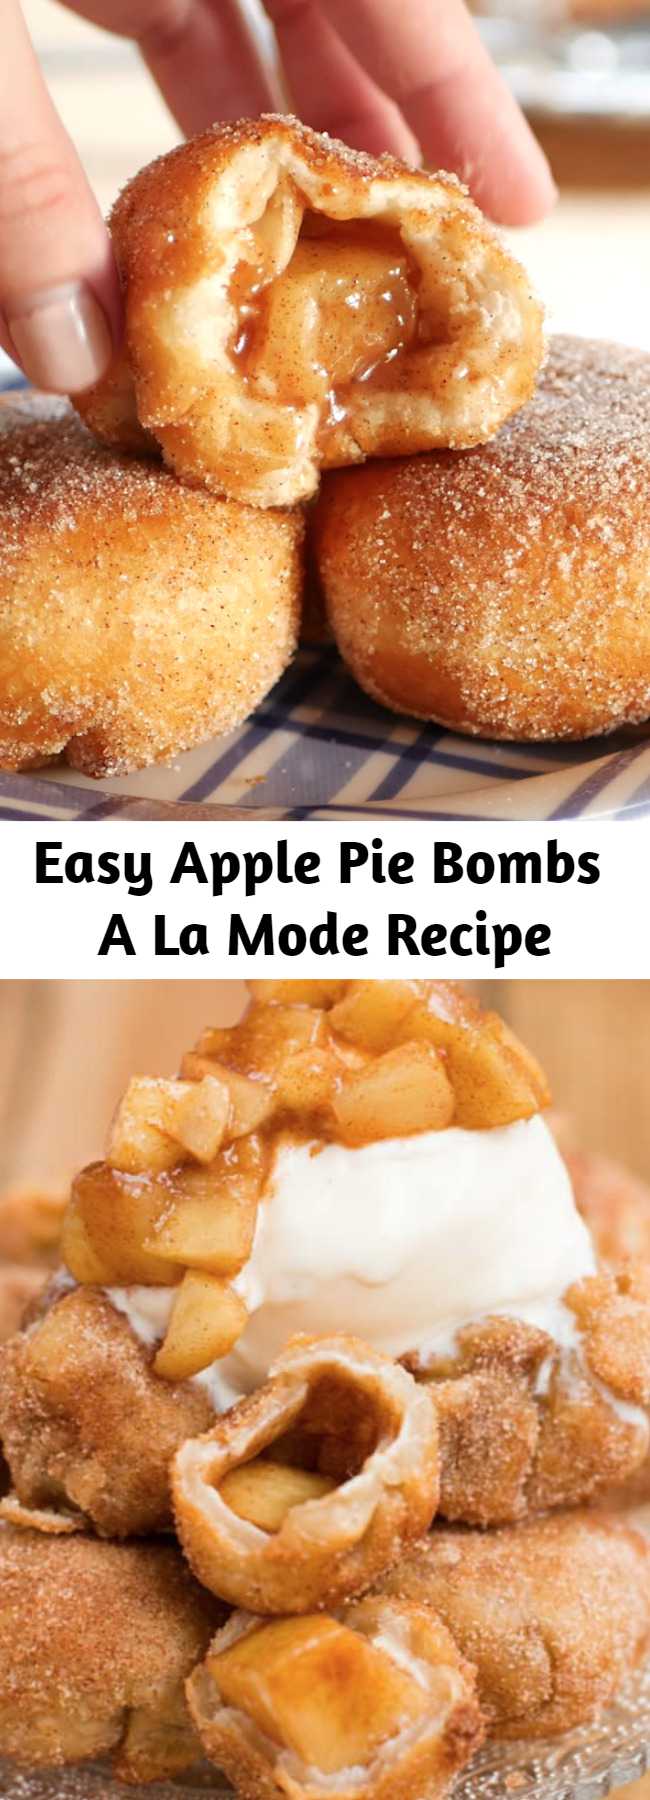 Easy Apple Pie Bombs A La Mode Recipe - It's not fall until you've made apple pie bombs a la mode with creamy vanilla ice cream and those glazed apples all over the tops. I love fall dessert recipes!